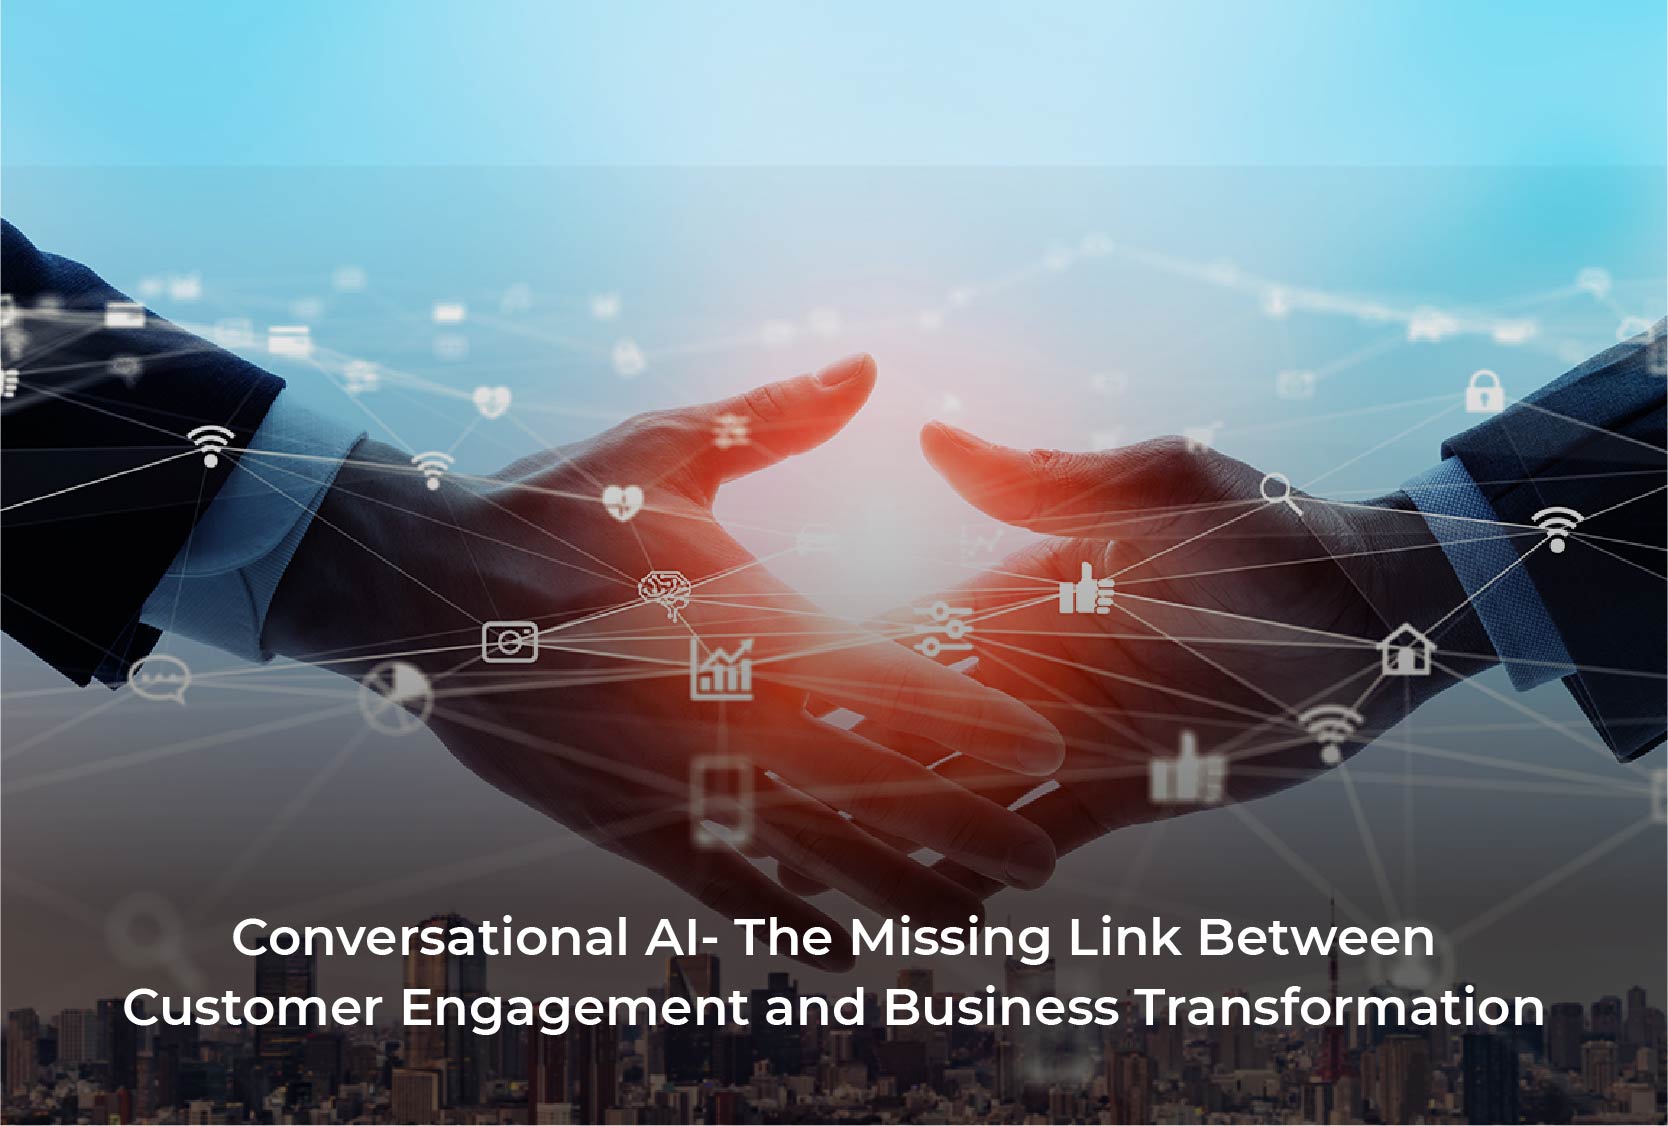 Conversational AI- The Missing Link Between Customer Engagement and Business Transformation